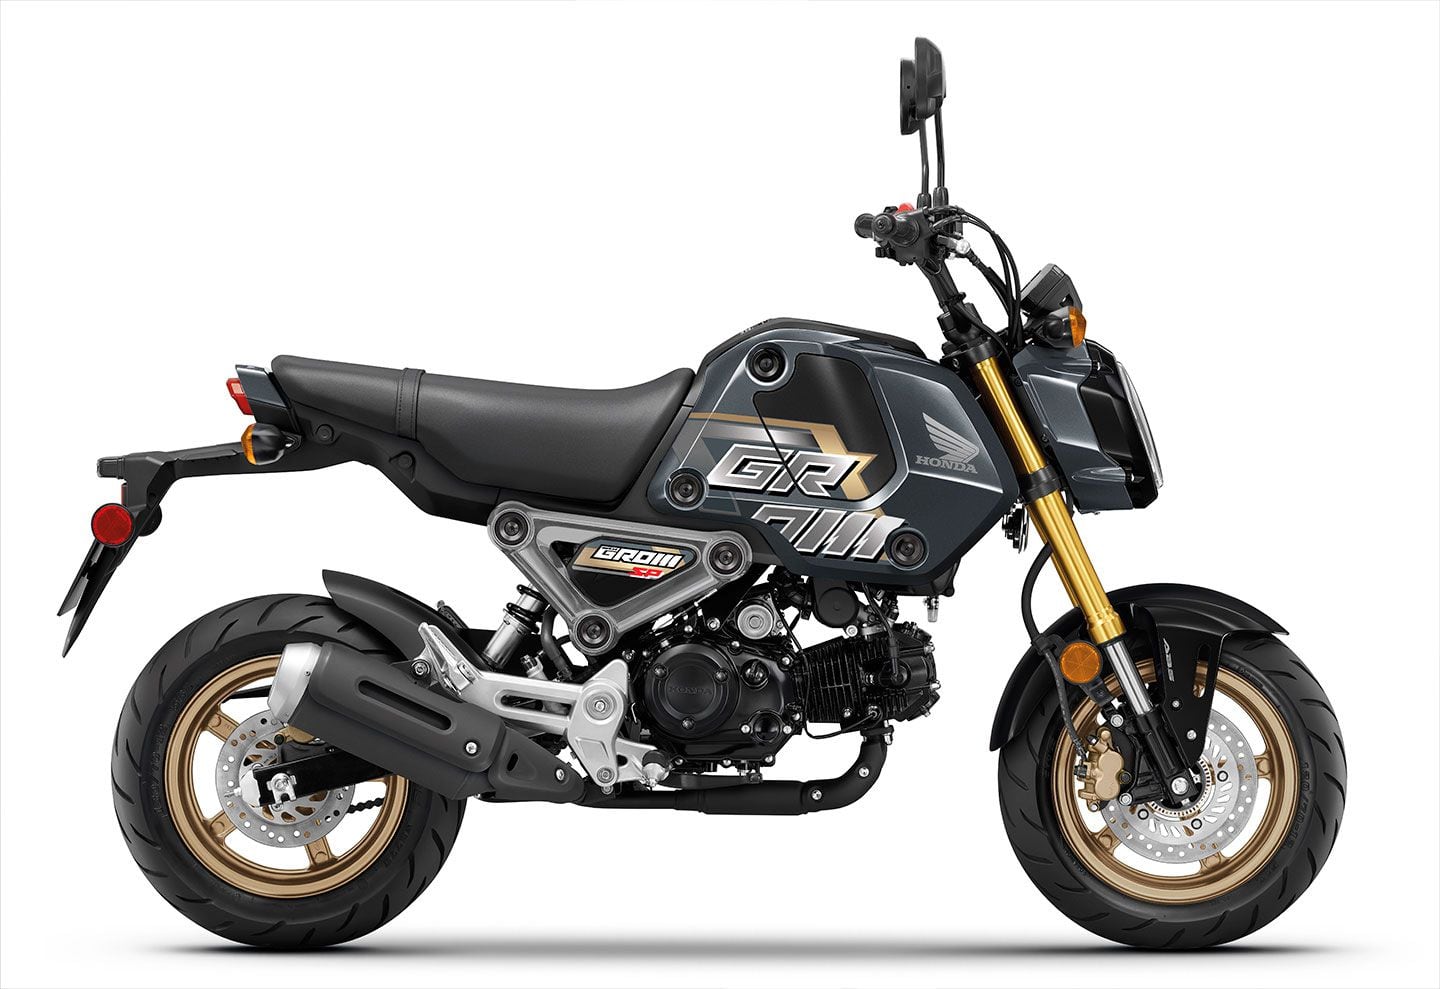 Ah, the Honda Grom. Can hedonistic fun coexist with sensible things like fuel economy? This is America, we can have it all.